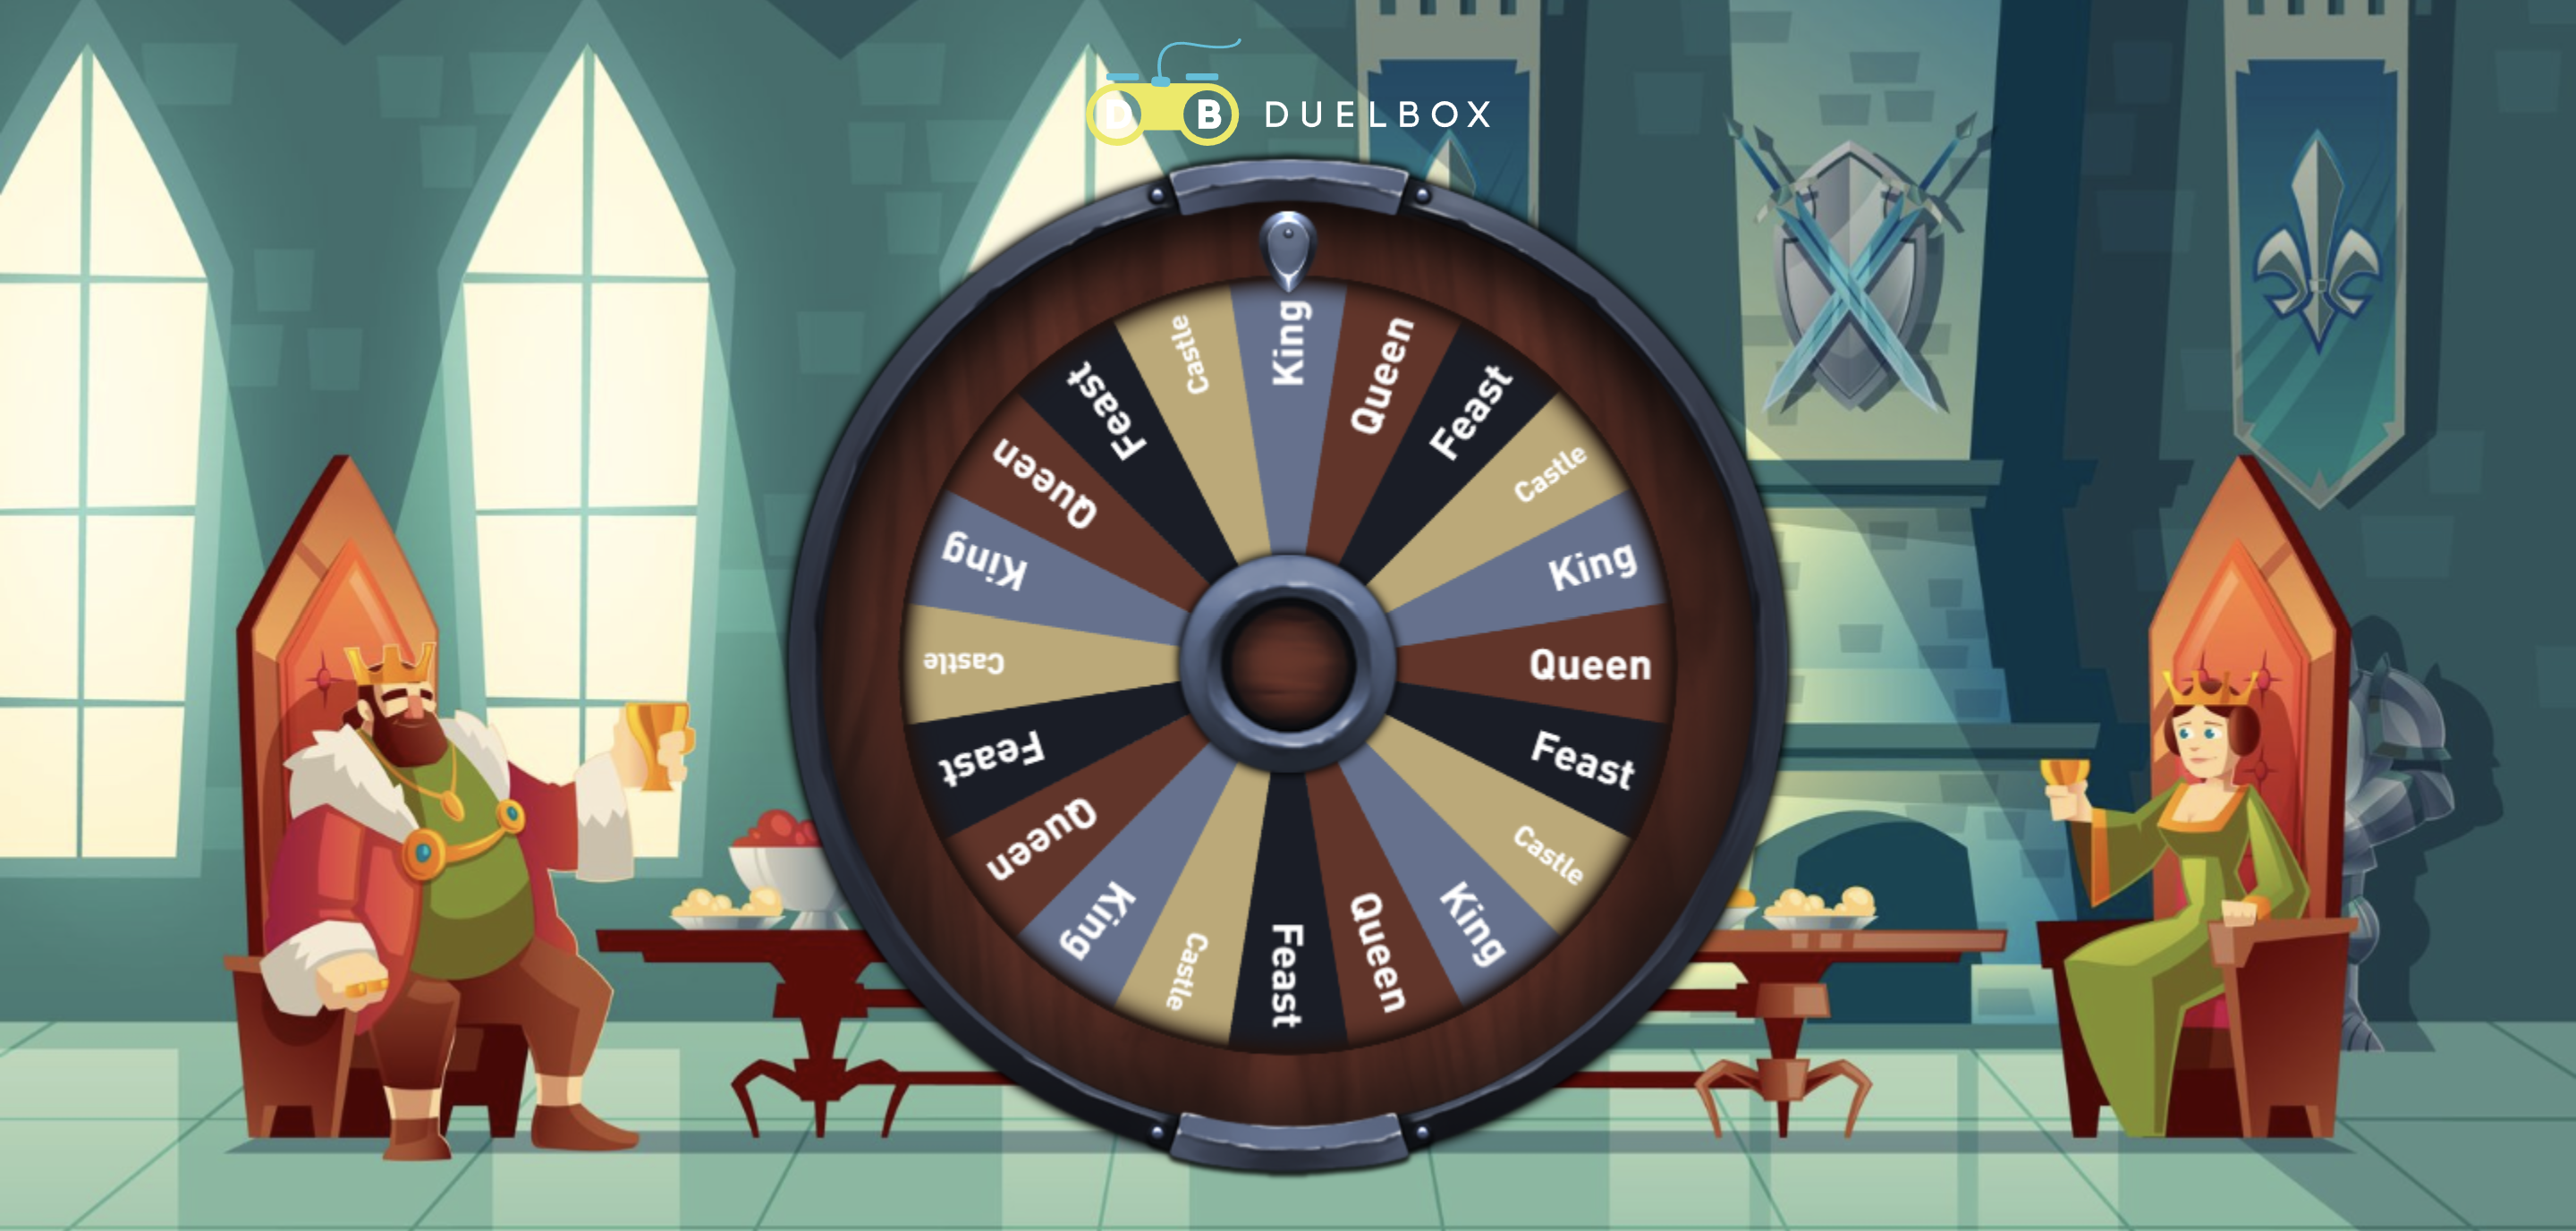 Spin wheel for trade shows